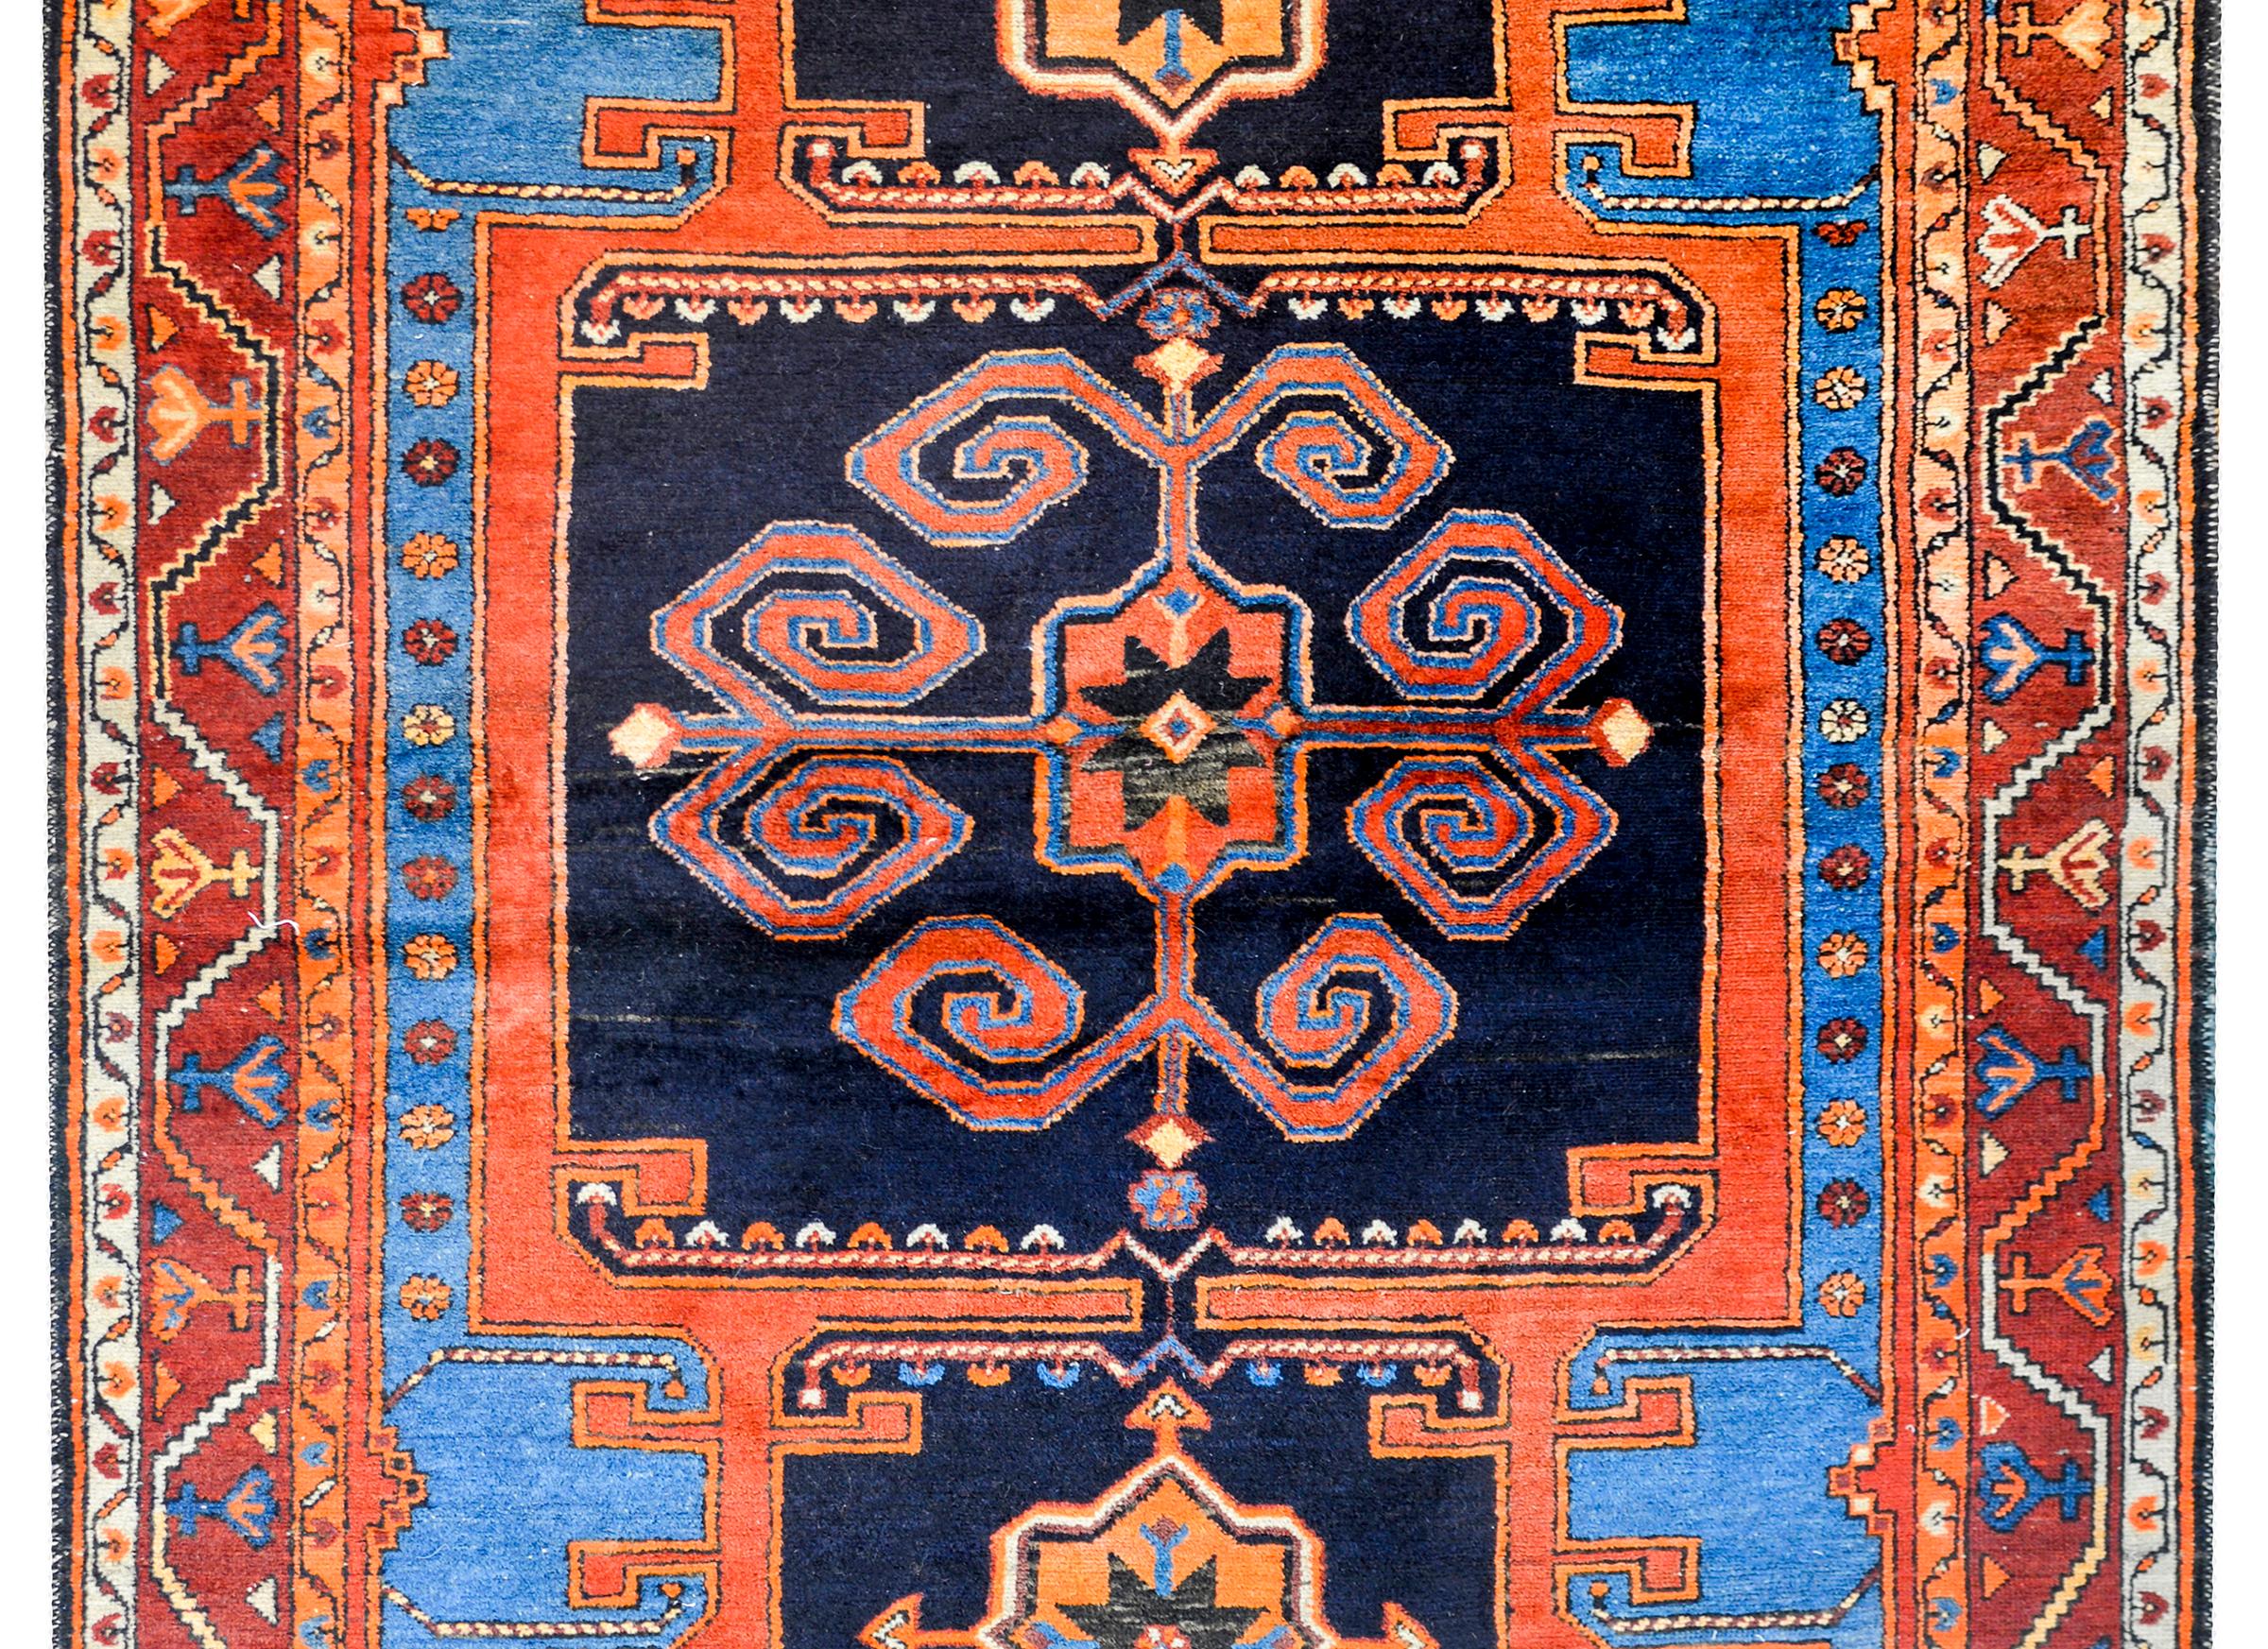 A wonderful early 20th century Persian Karabab rug with a bold tribal pattern containing a large central stylized floral medallion woven in light indigo and crimson on a dark indigo background amidst a field of multiple stylized flowers and